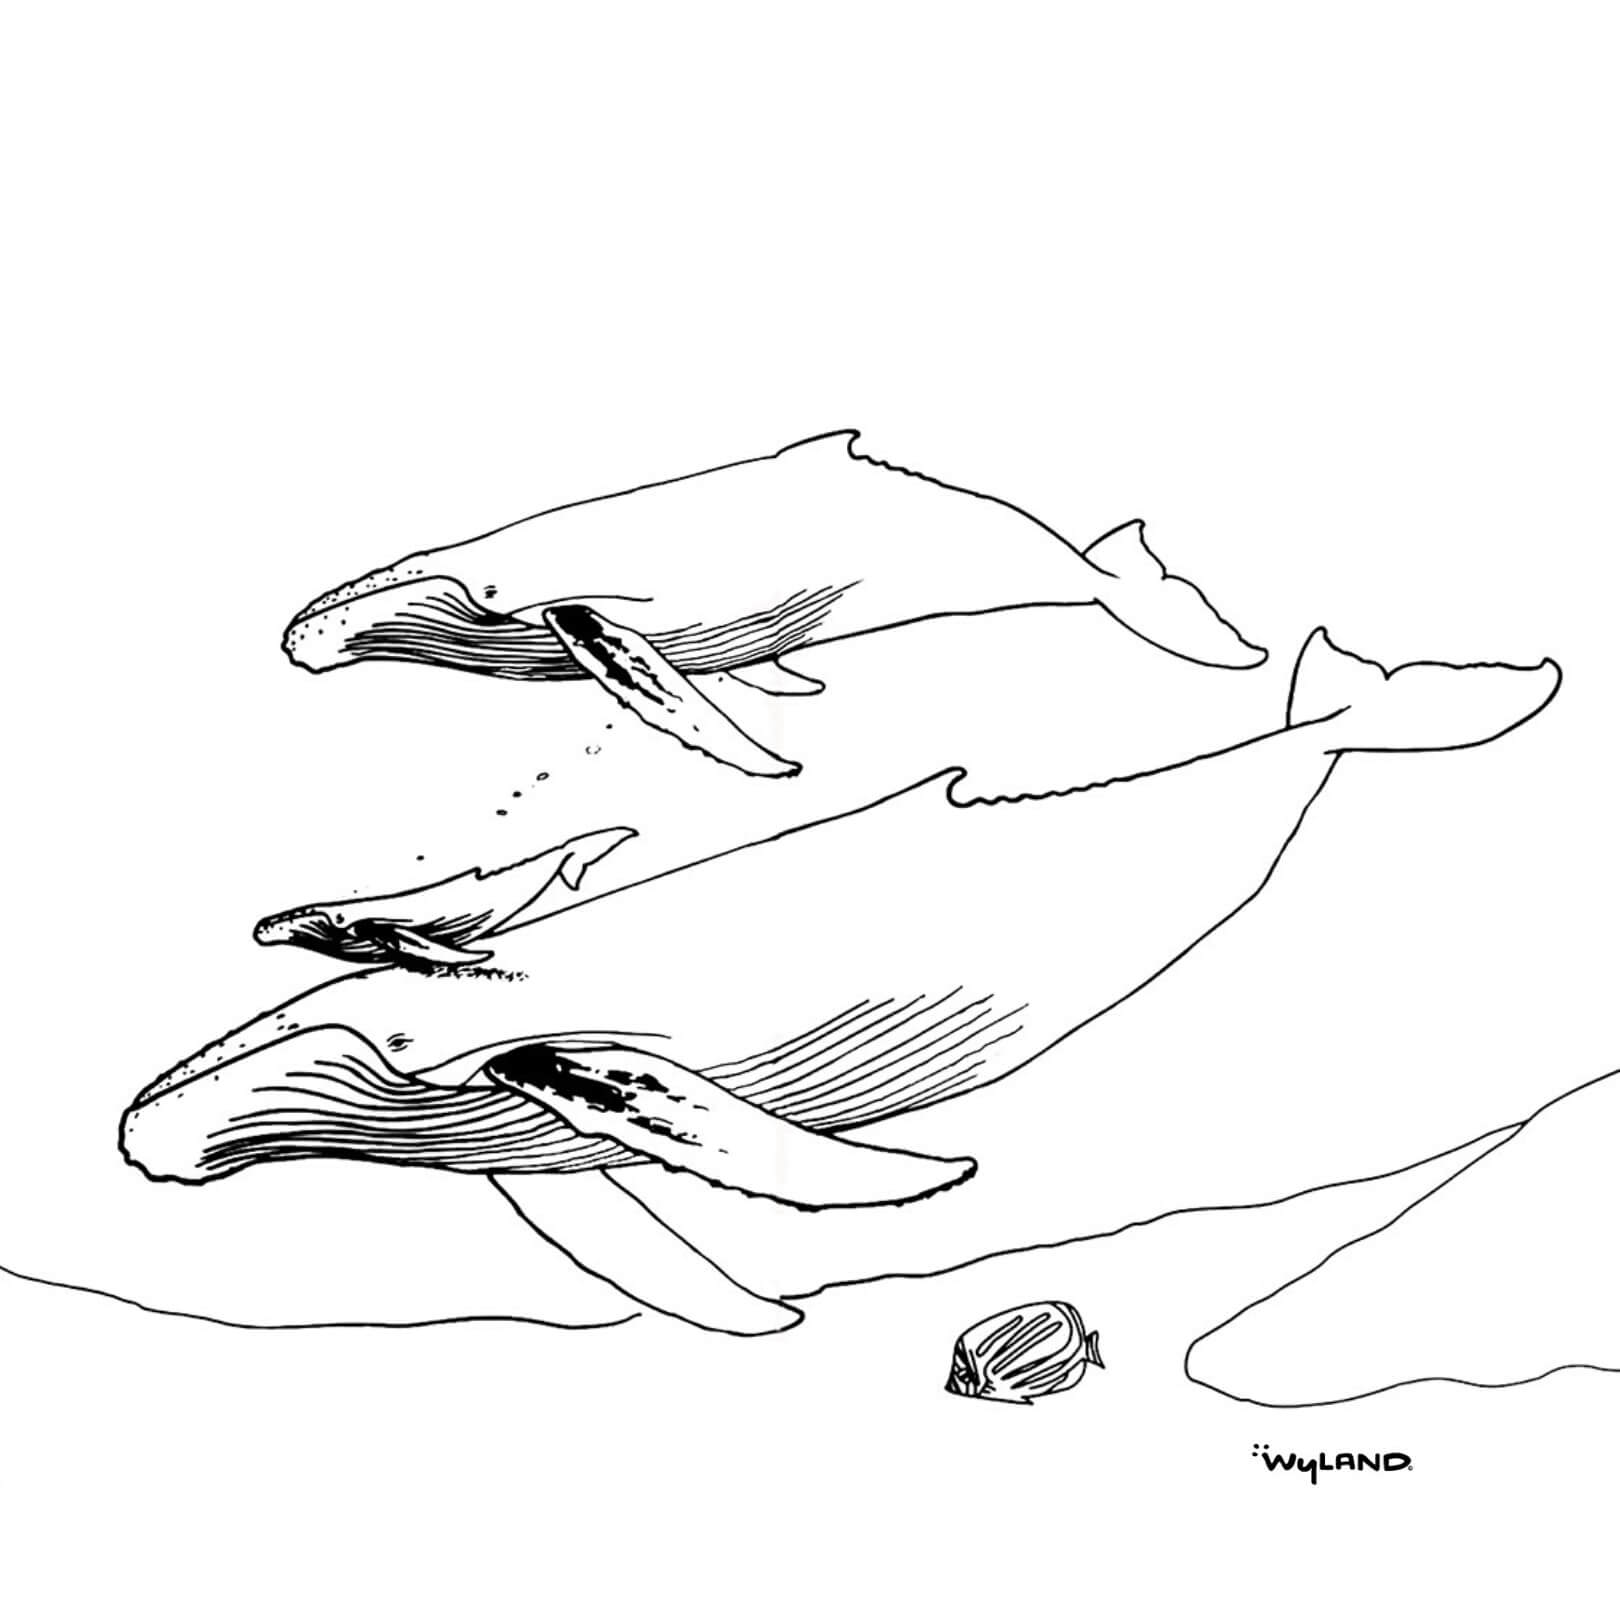 Whale Ohana   Humpback Family Coloring Page   FREE Download ...